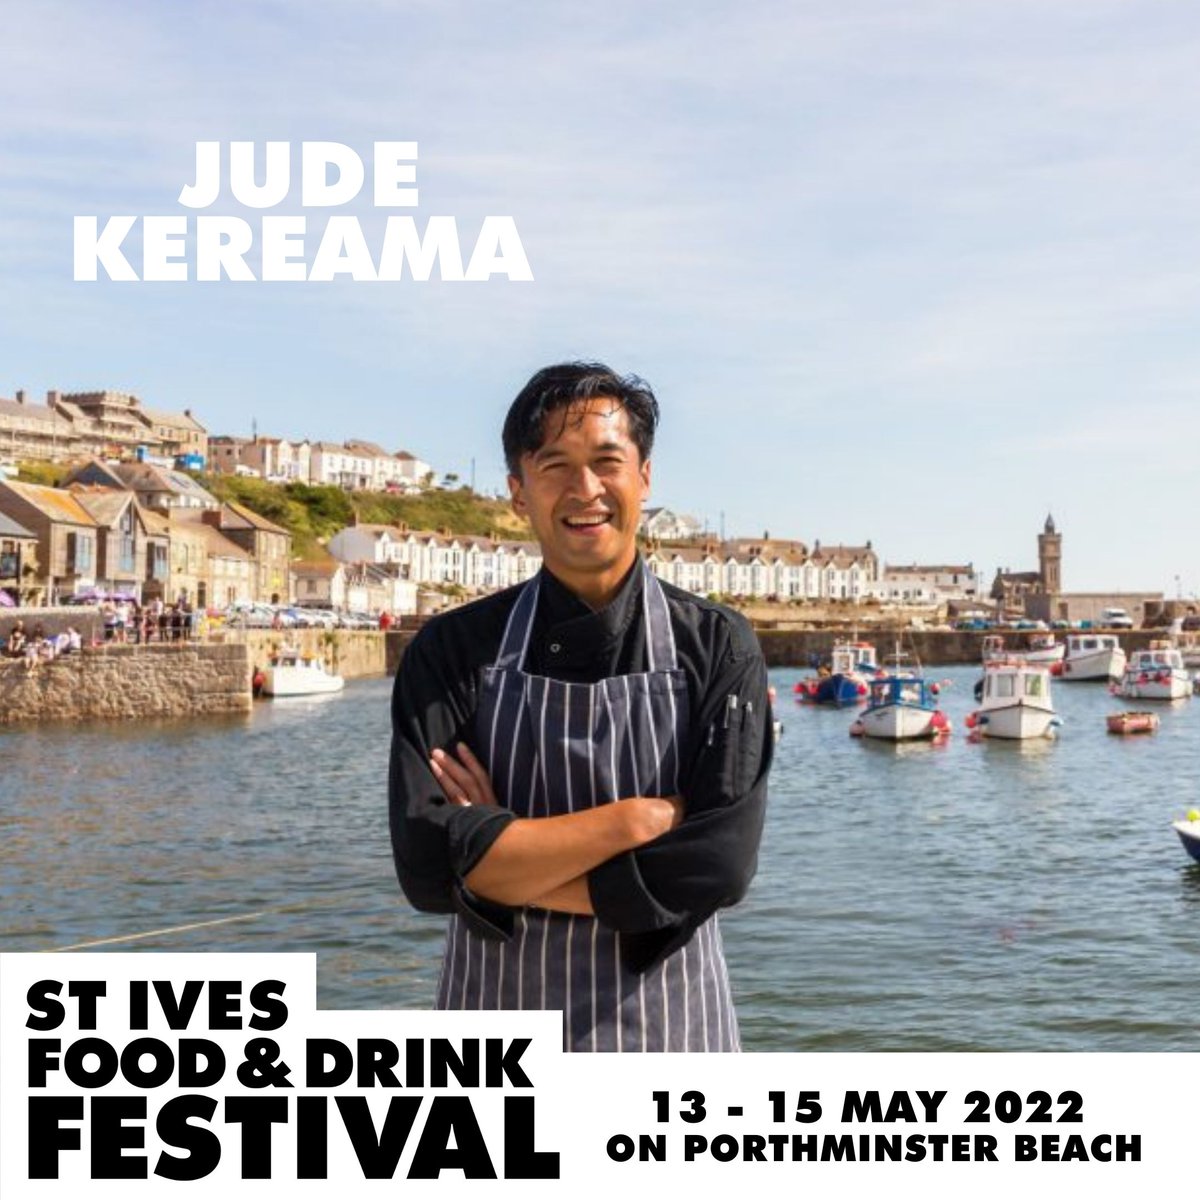 Next the spotlight shines on @JudeKereama who will be joining us at St Ives Food and Drink Festival this year. A well loved Cornwall local, Jude is heading down to the festival to show us how to bring his signature flair to even the most humble of ingredients. #judekereama